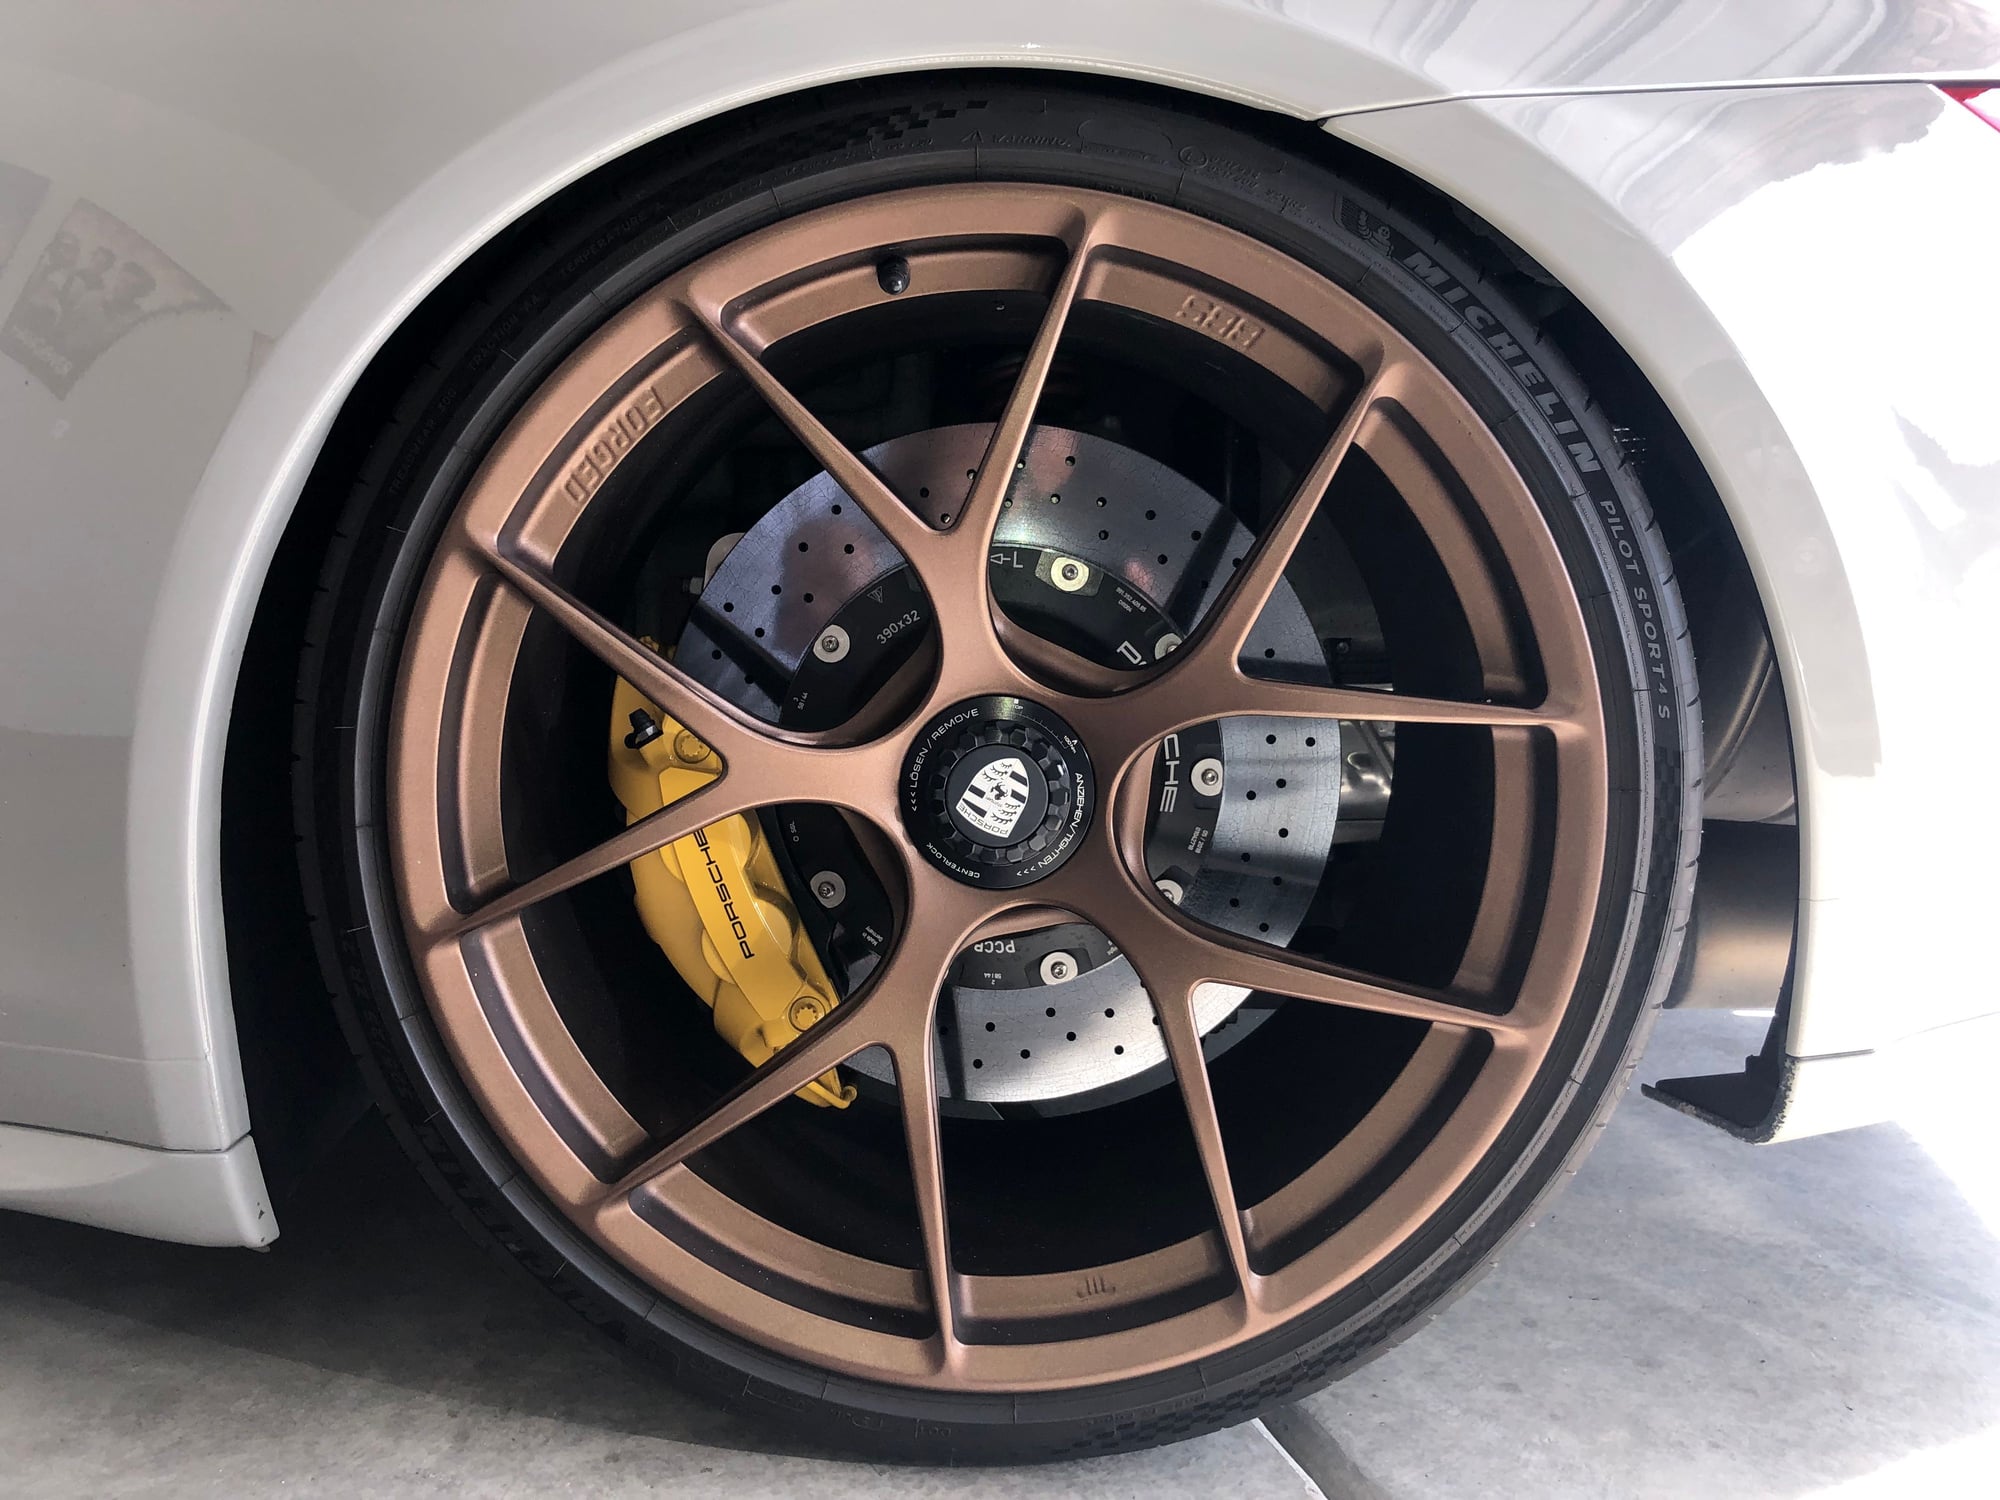 Wheels and Tires/Axles - FS: BBS FI-R Wheels - Used - 2014 to 2019 Porsche GT3 - Temecula, CA 92592, United States